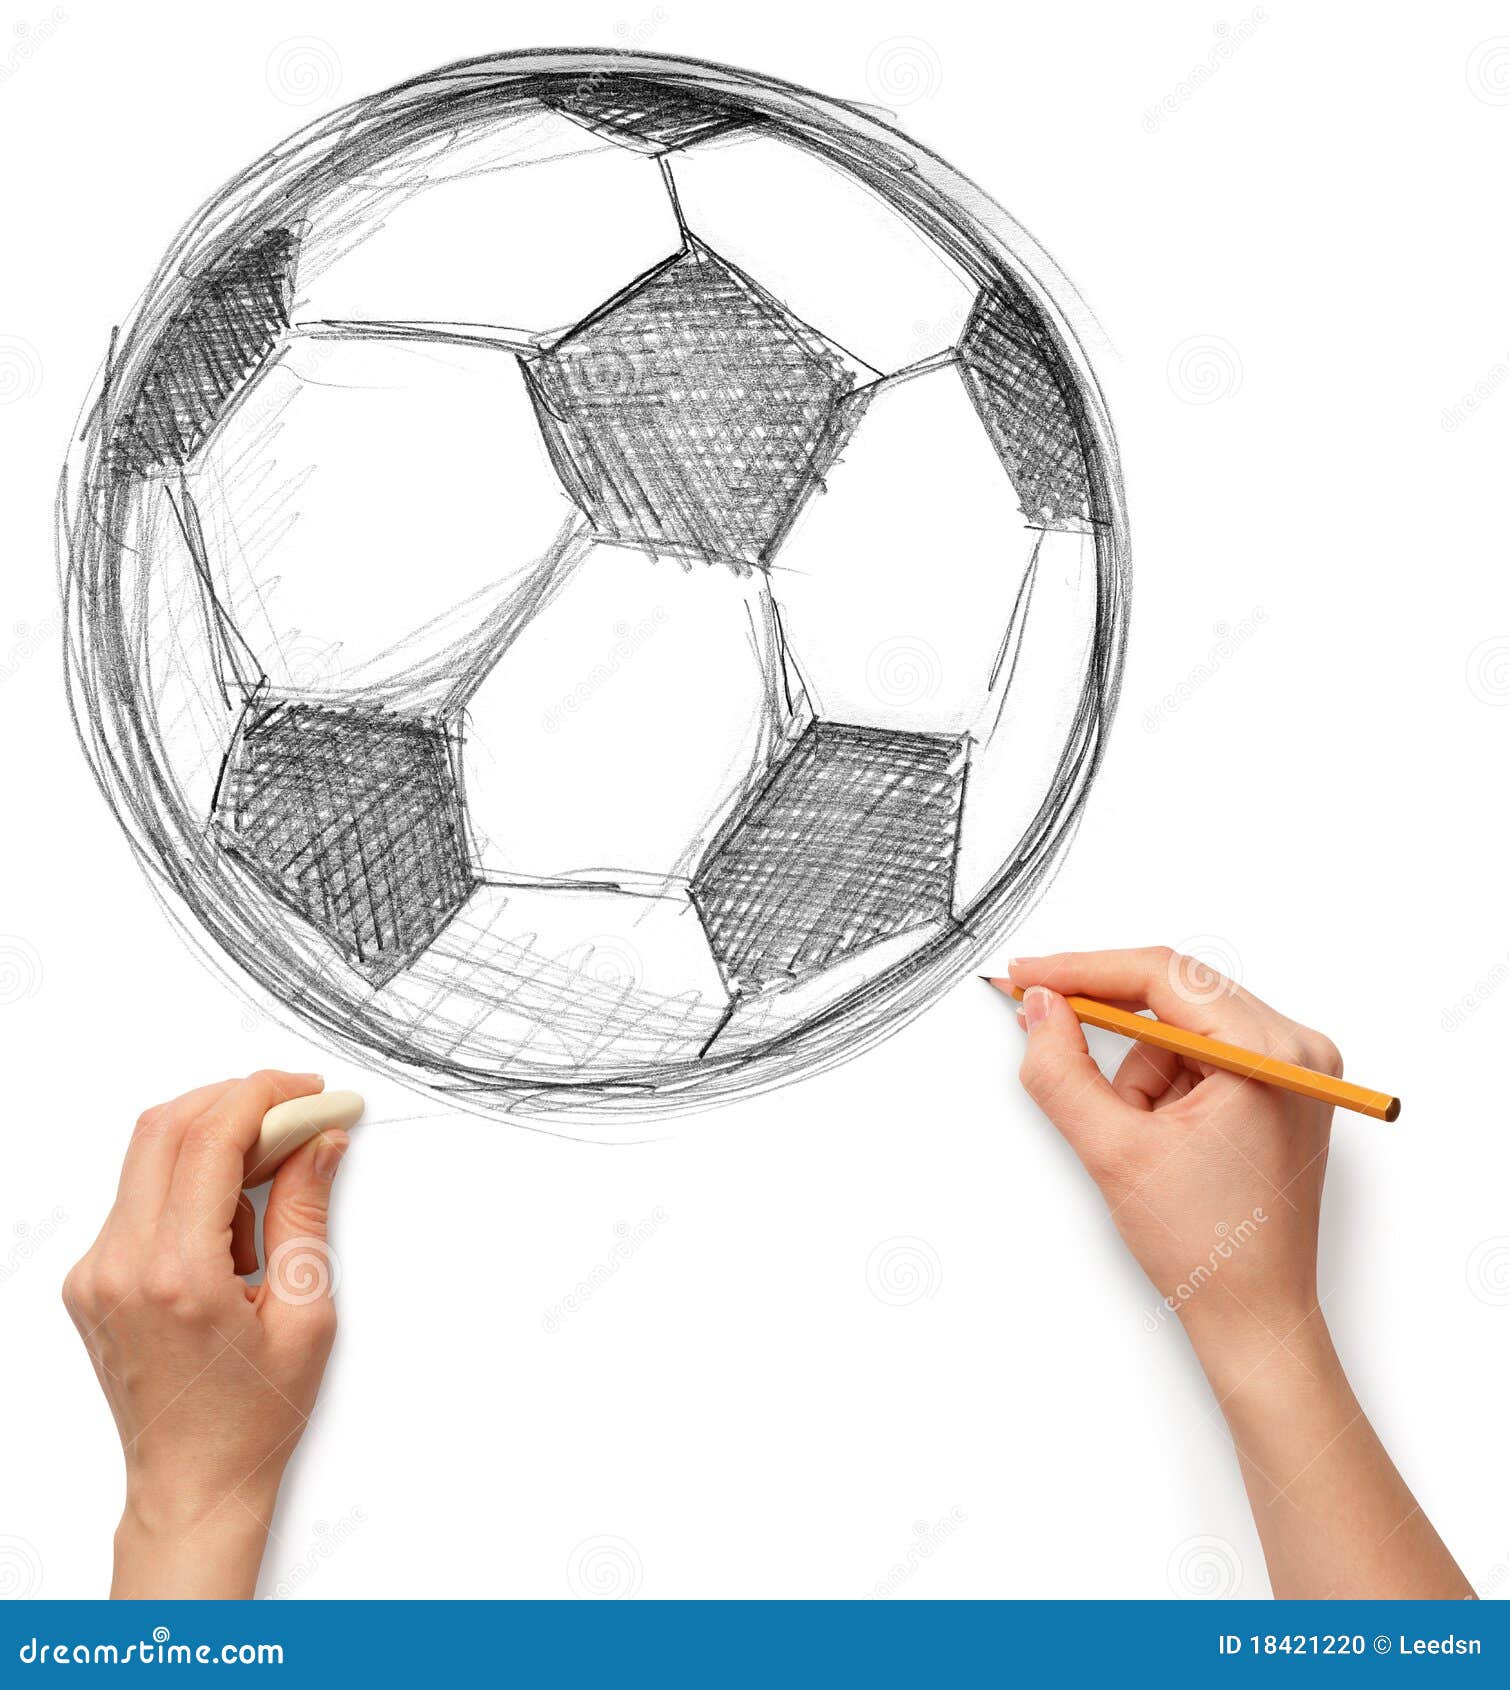 How to draw a Football step by step (very easy) || Art video - YouTube